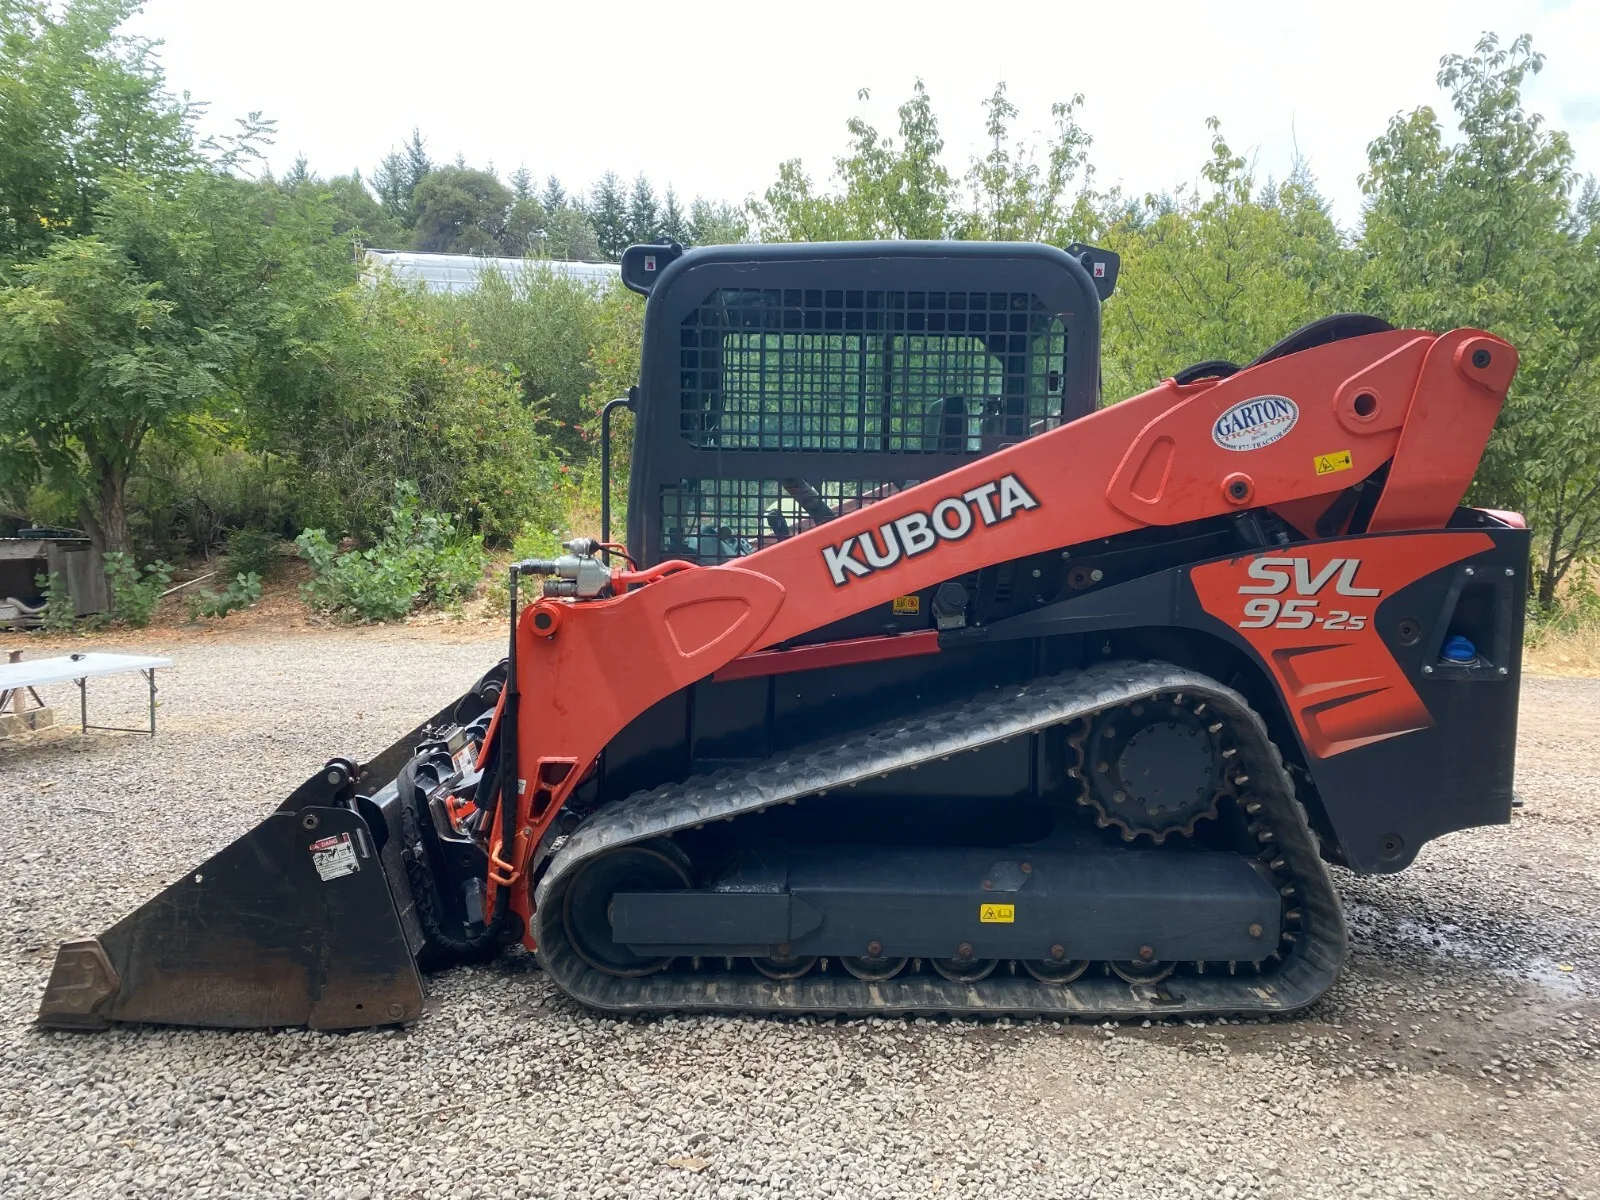 2016 Kubota Svl95-2s - 4 In 1 Bucket And Forks - 885hrs - 500mi Free Delivery